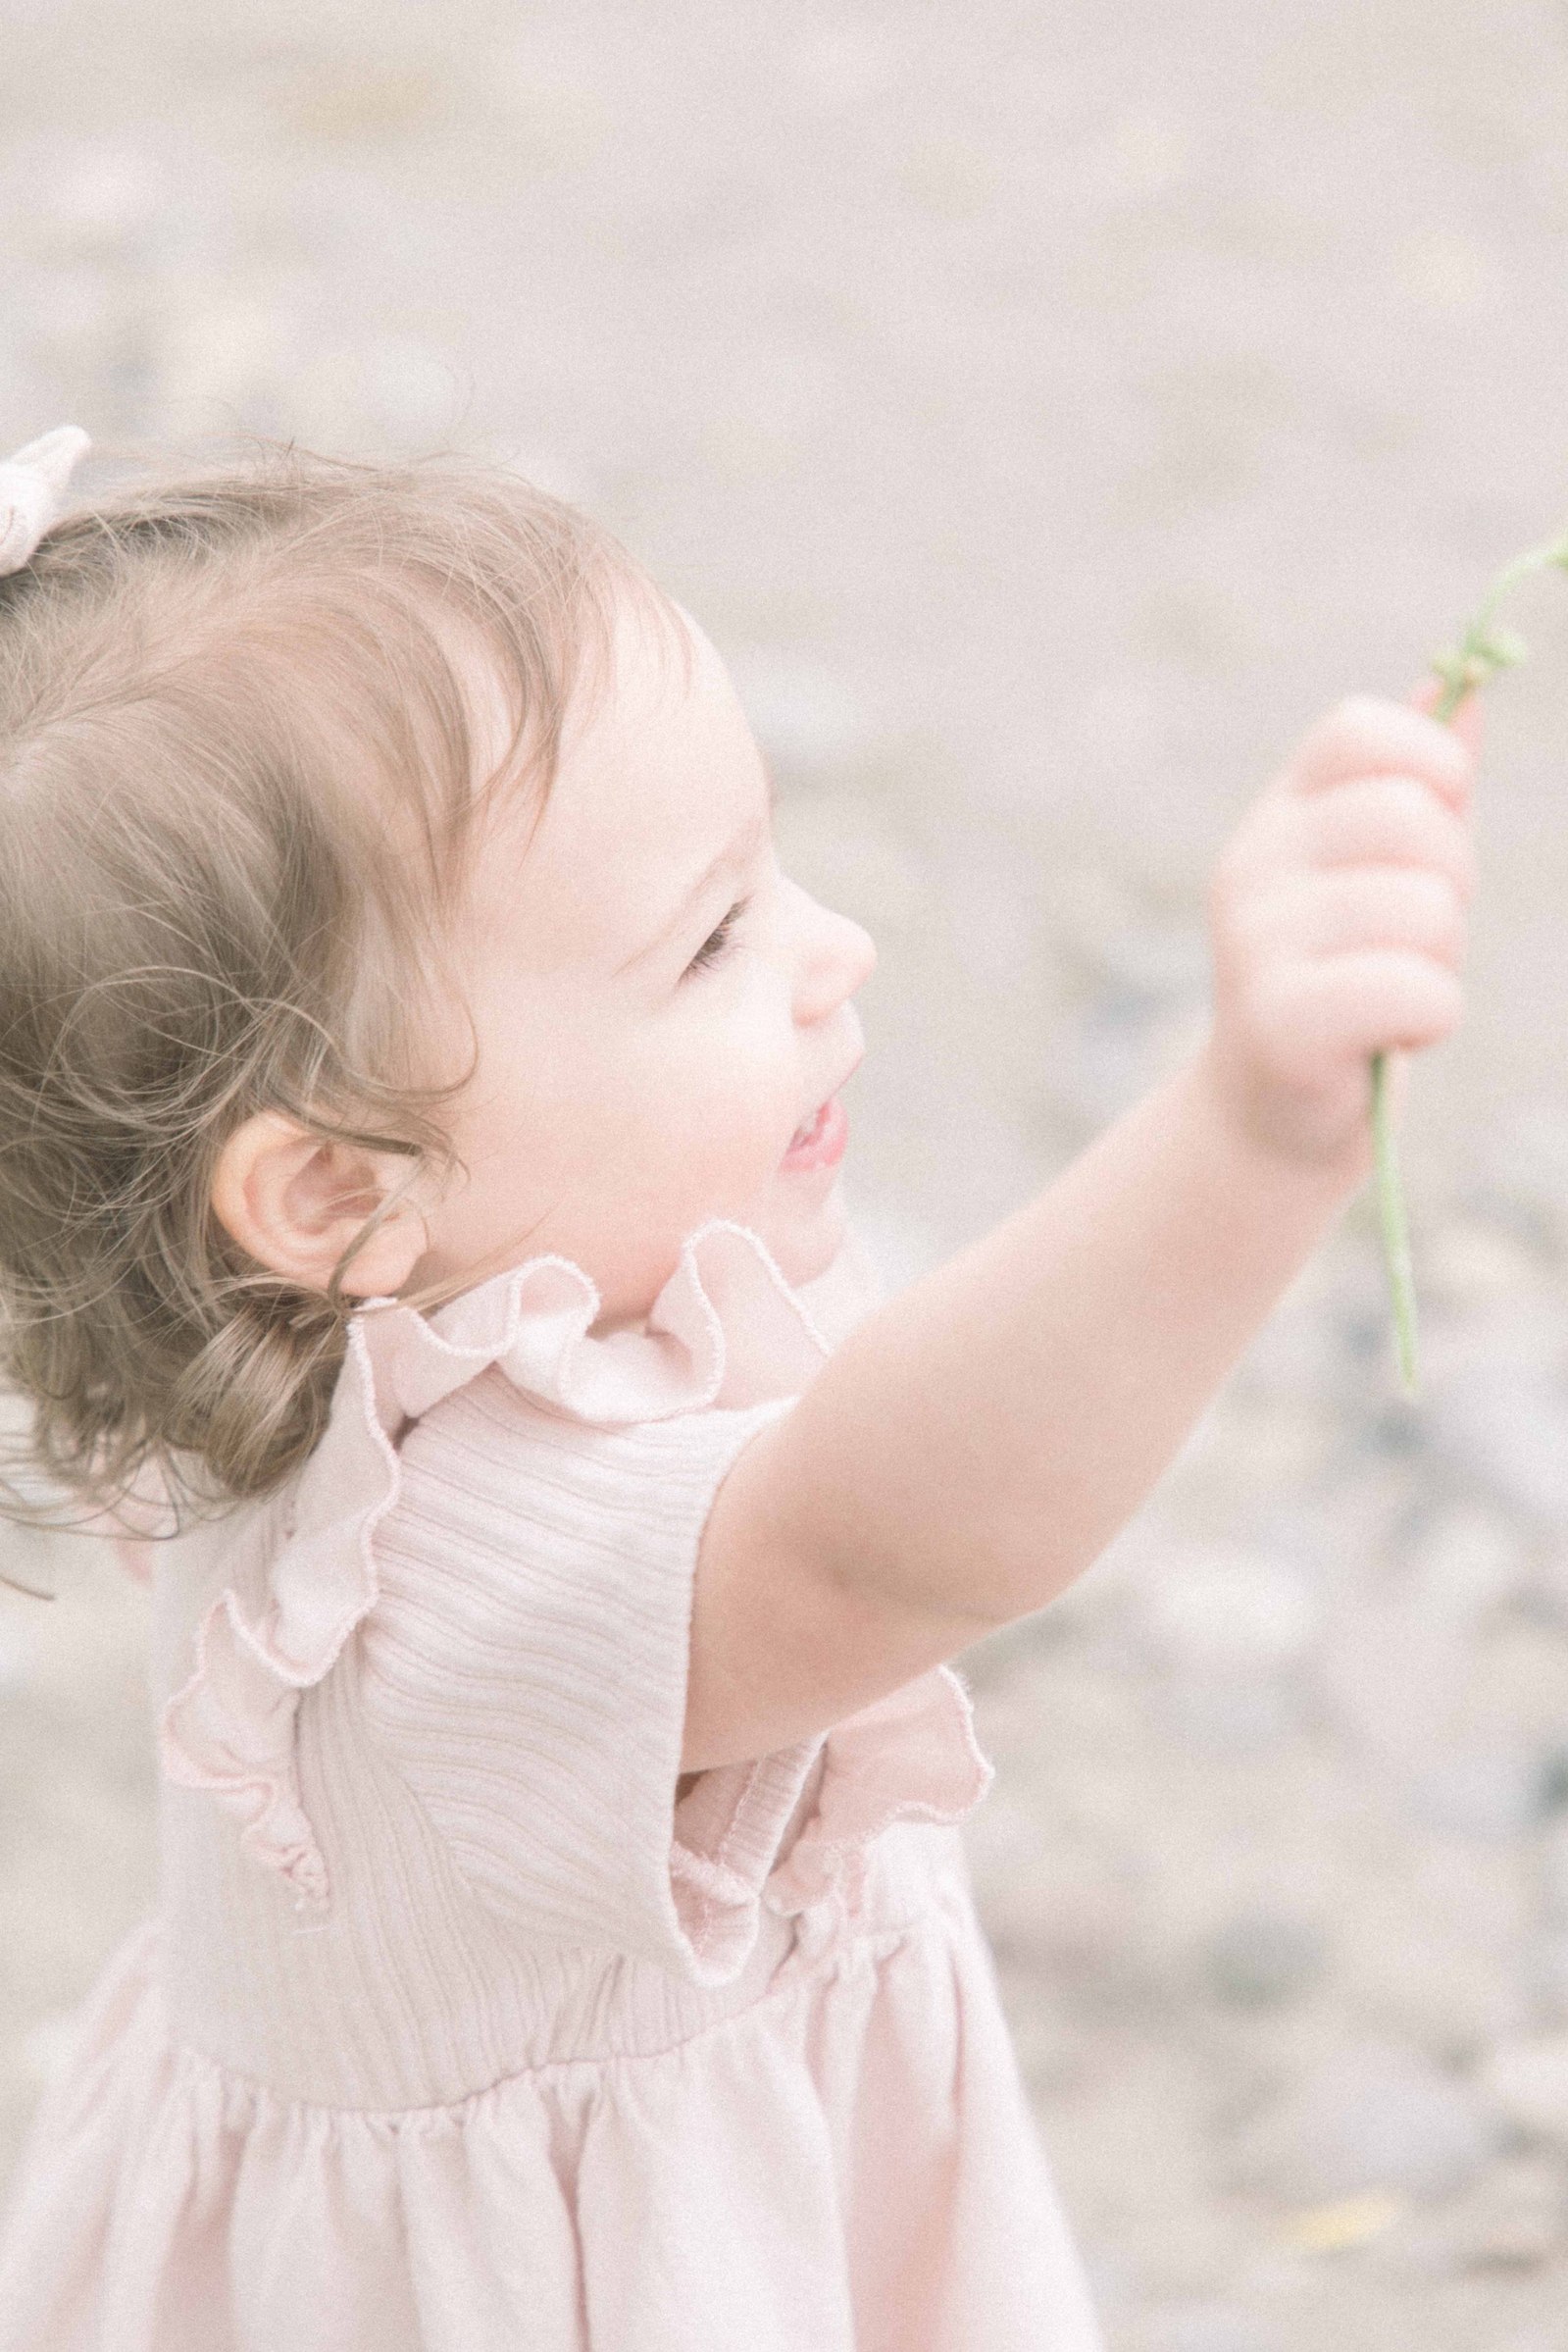 Portrait little girl on the beach holding a flower that she found, Niagara Portrait Photographer, Niagara Family Photographer, Niagara Motherhood Photography, Beach Portrait Photography, Emily VanderBeek Photography.